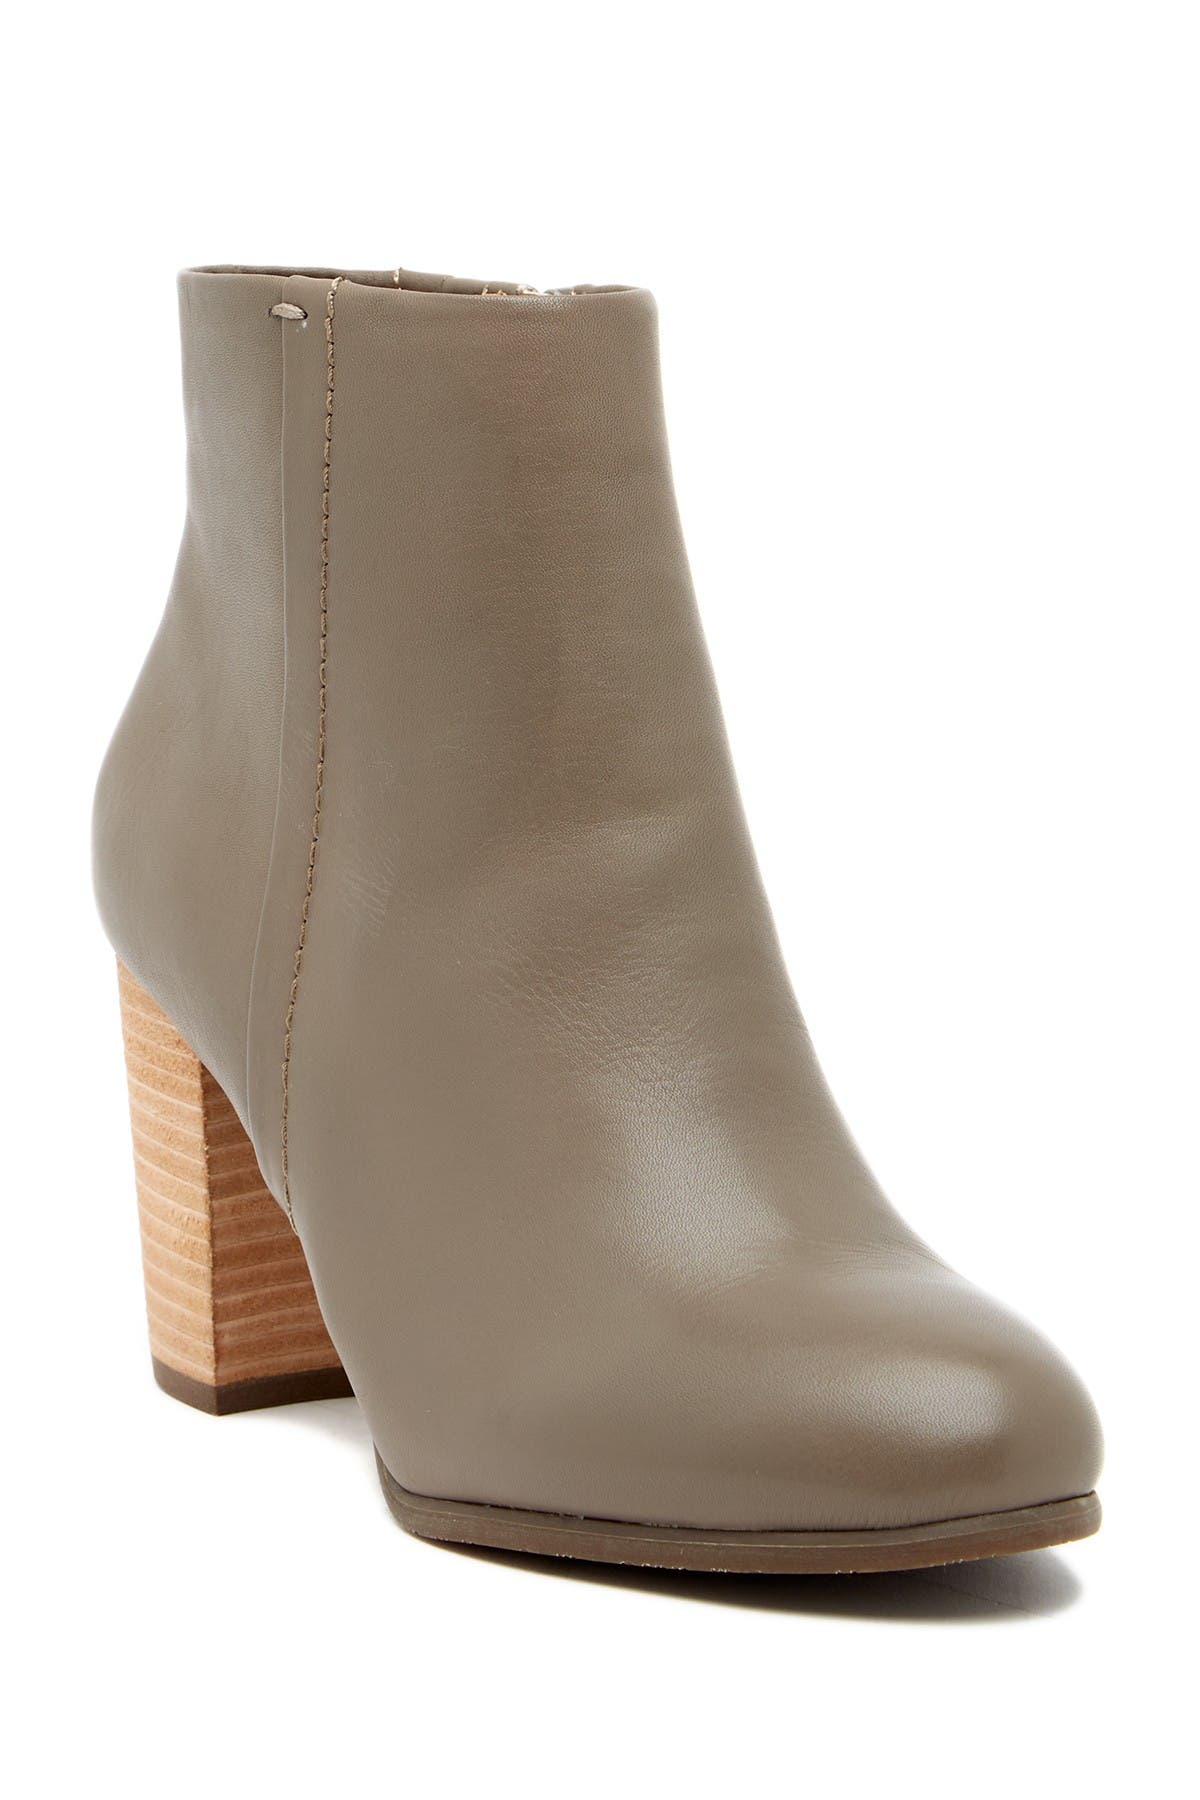 vionic kennedy ankle boot